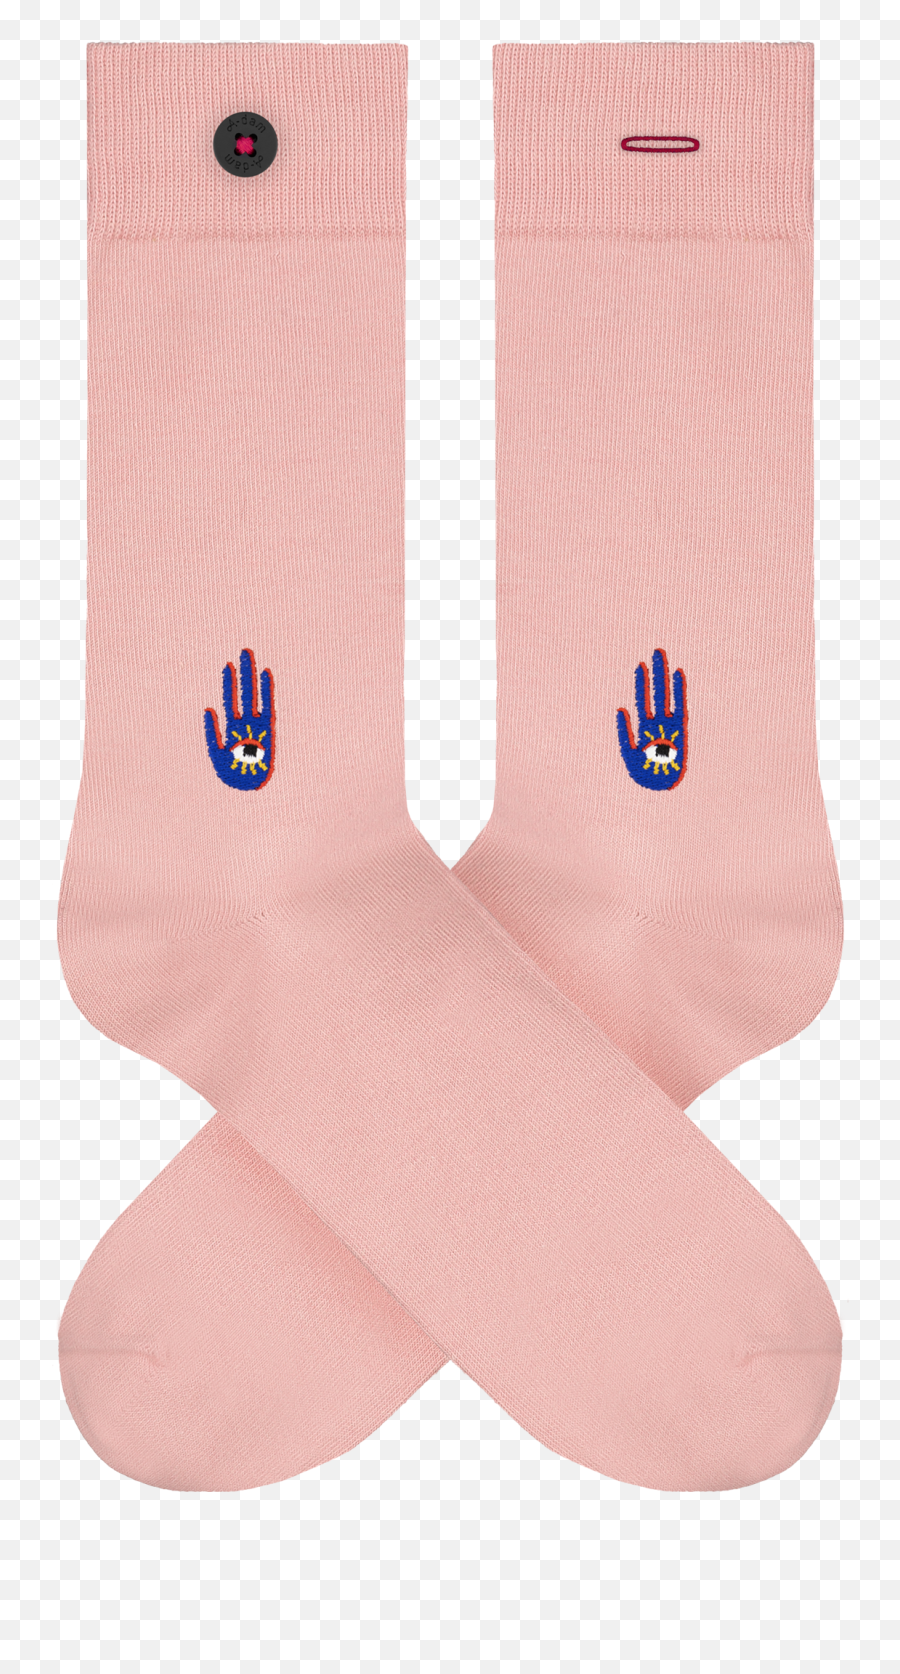 Socks From Organic Cotton And Recycled Fishing Nets Emoji,Google Animated Dancing Lobster Emoticon